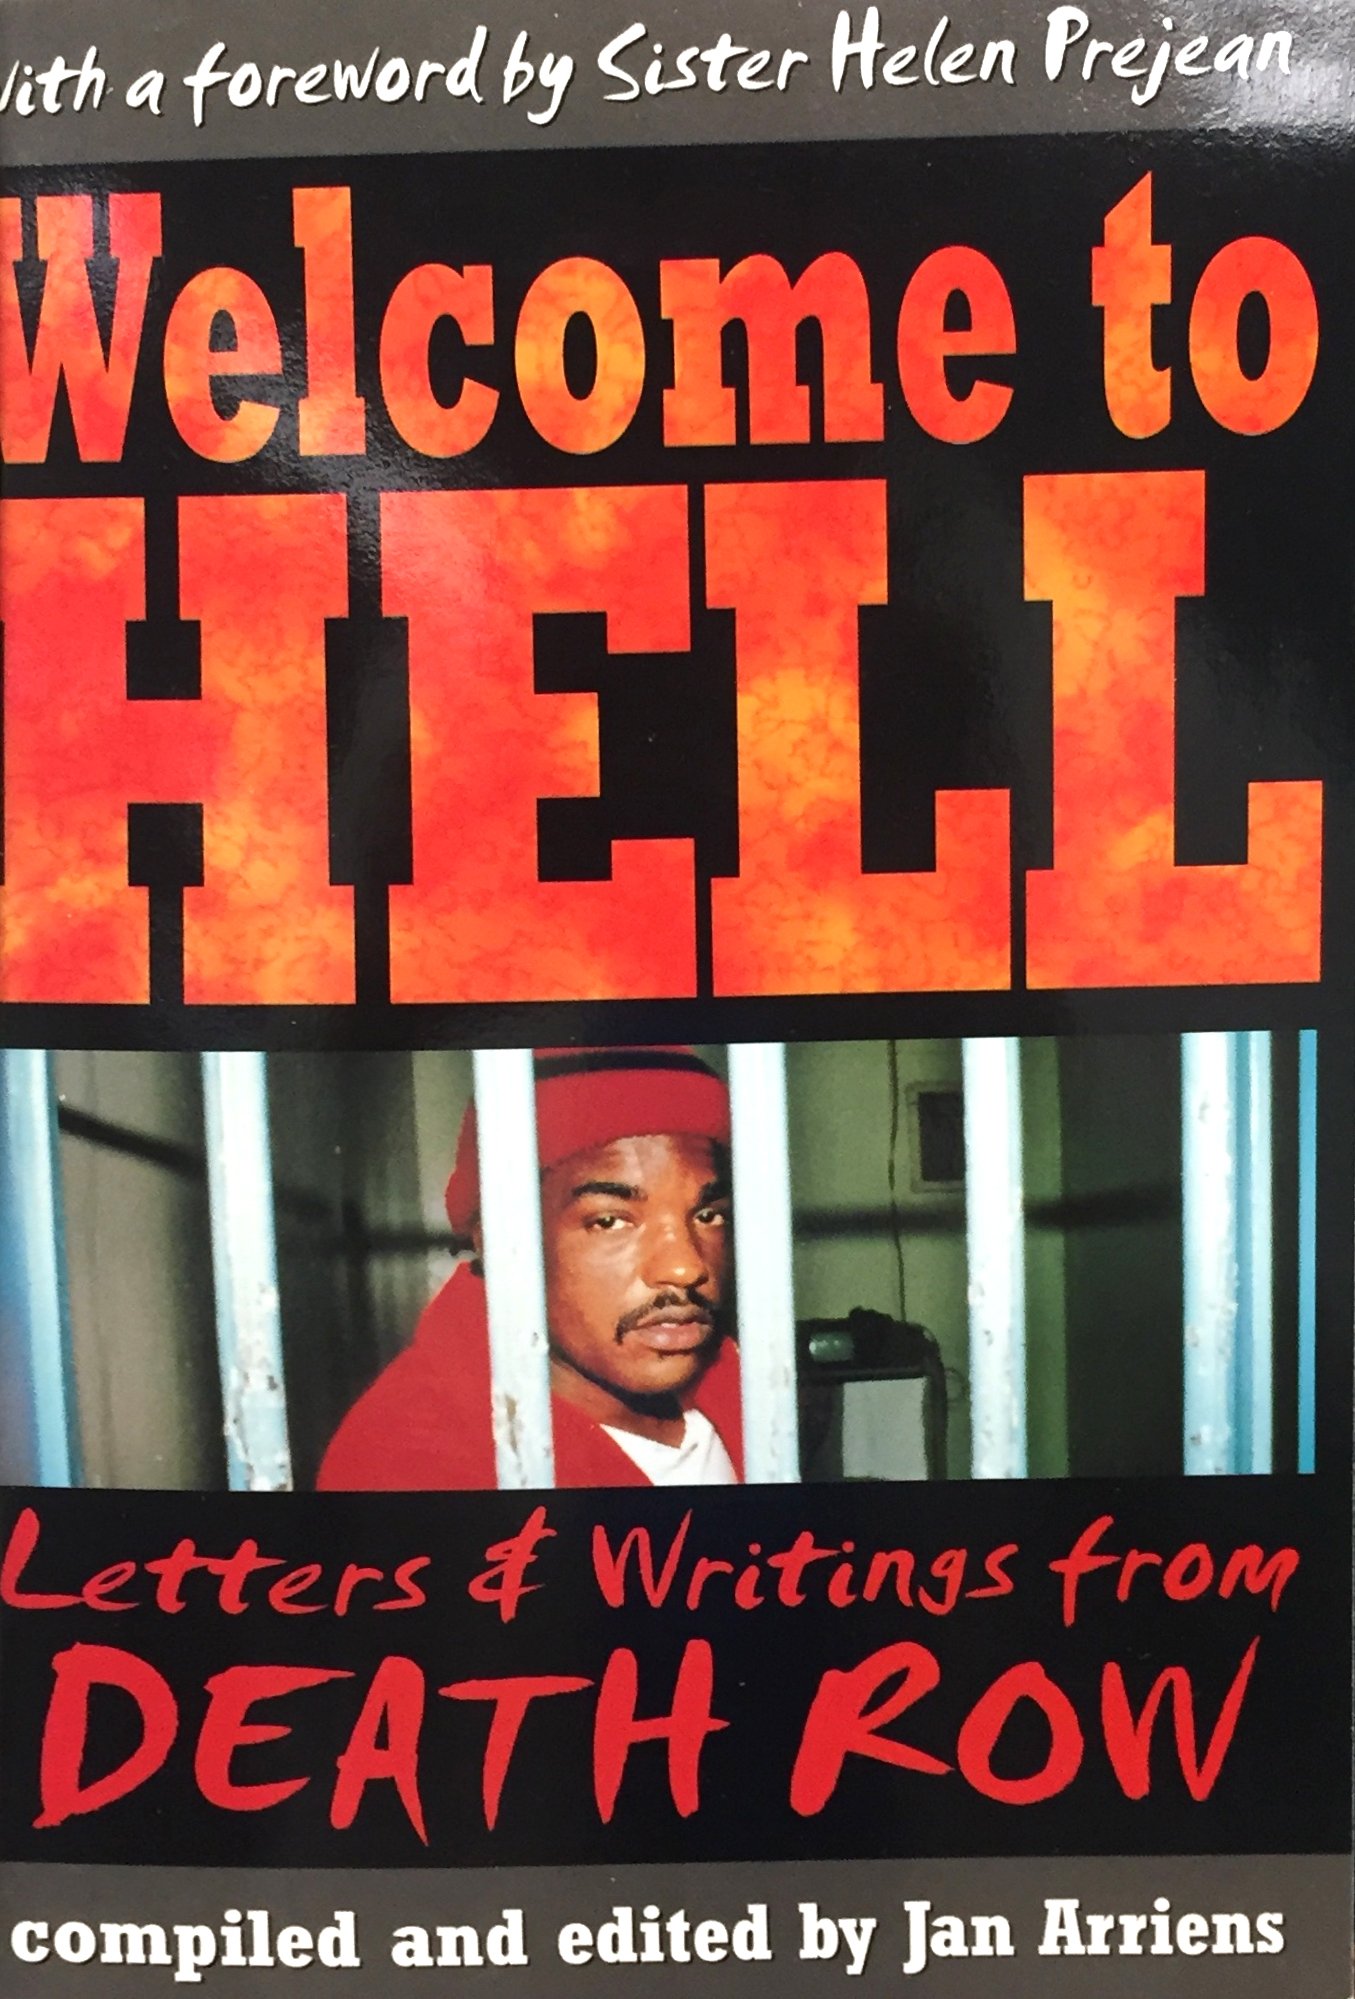 "Welcome to Hell" written in bold letters with overlaid with fire. Below, a picture of a black man behind bars.